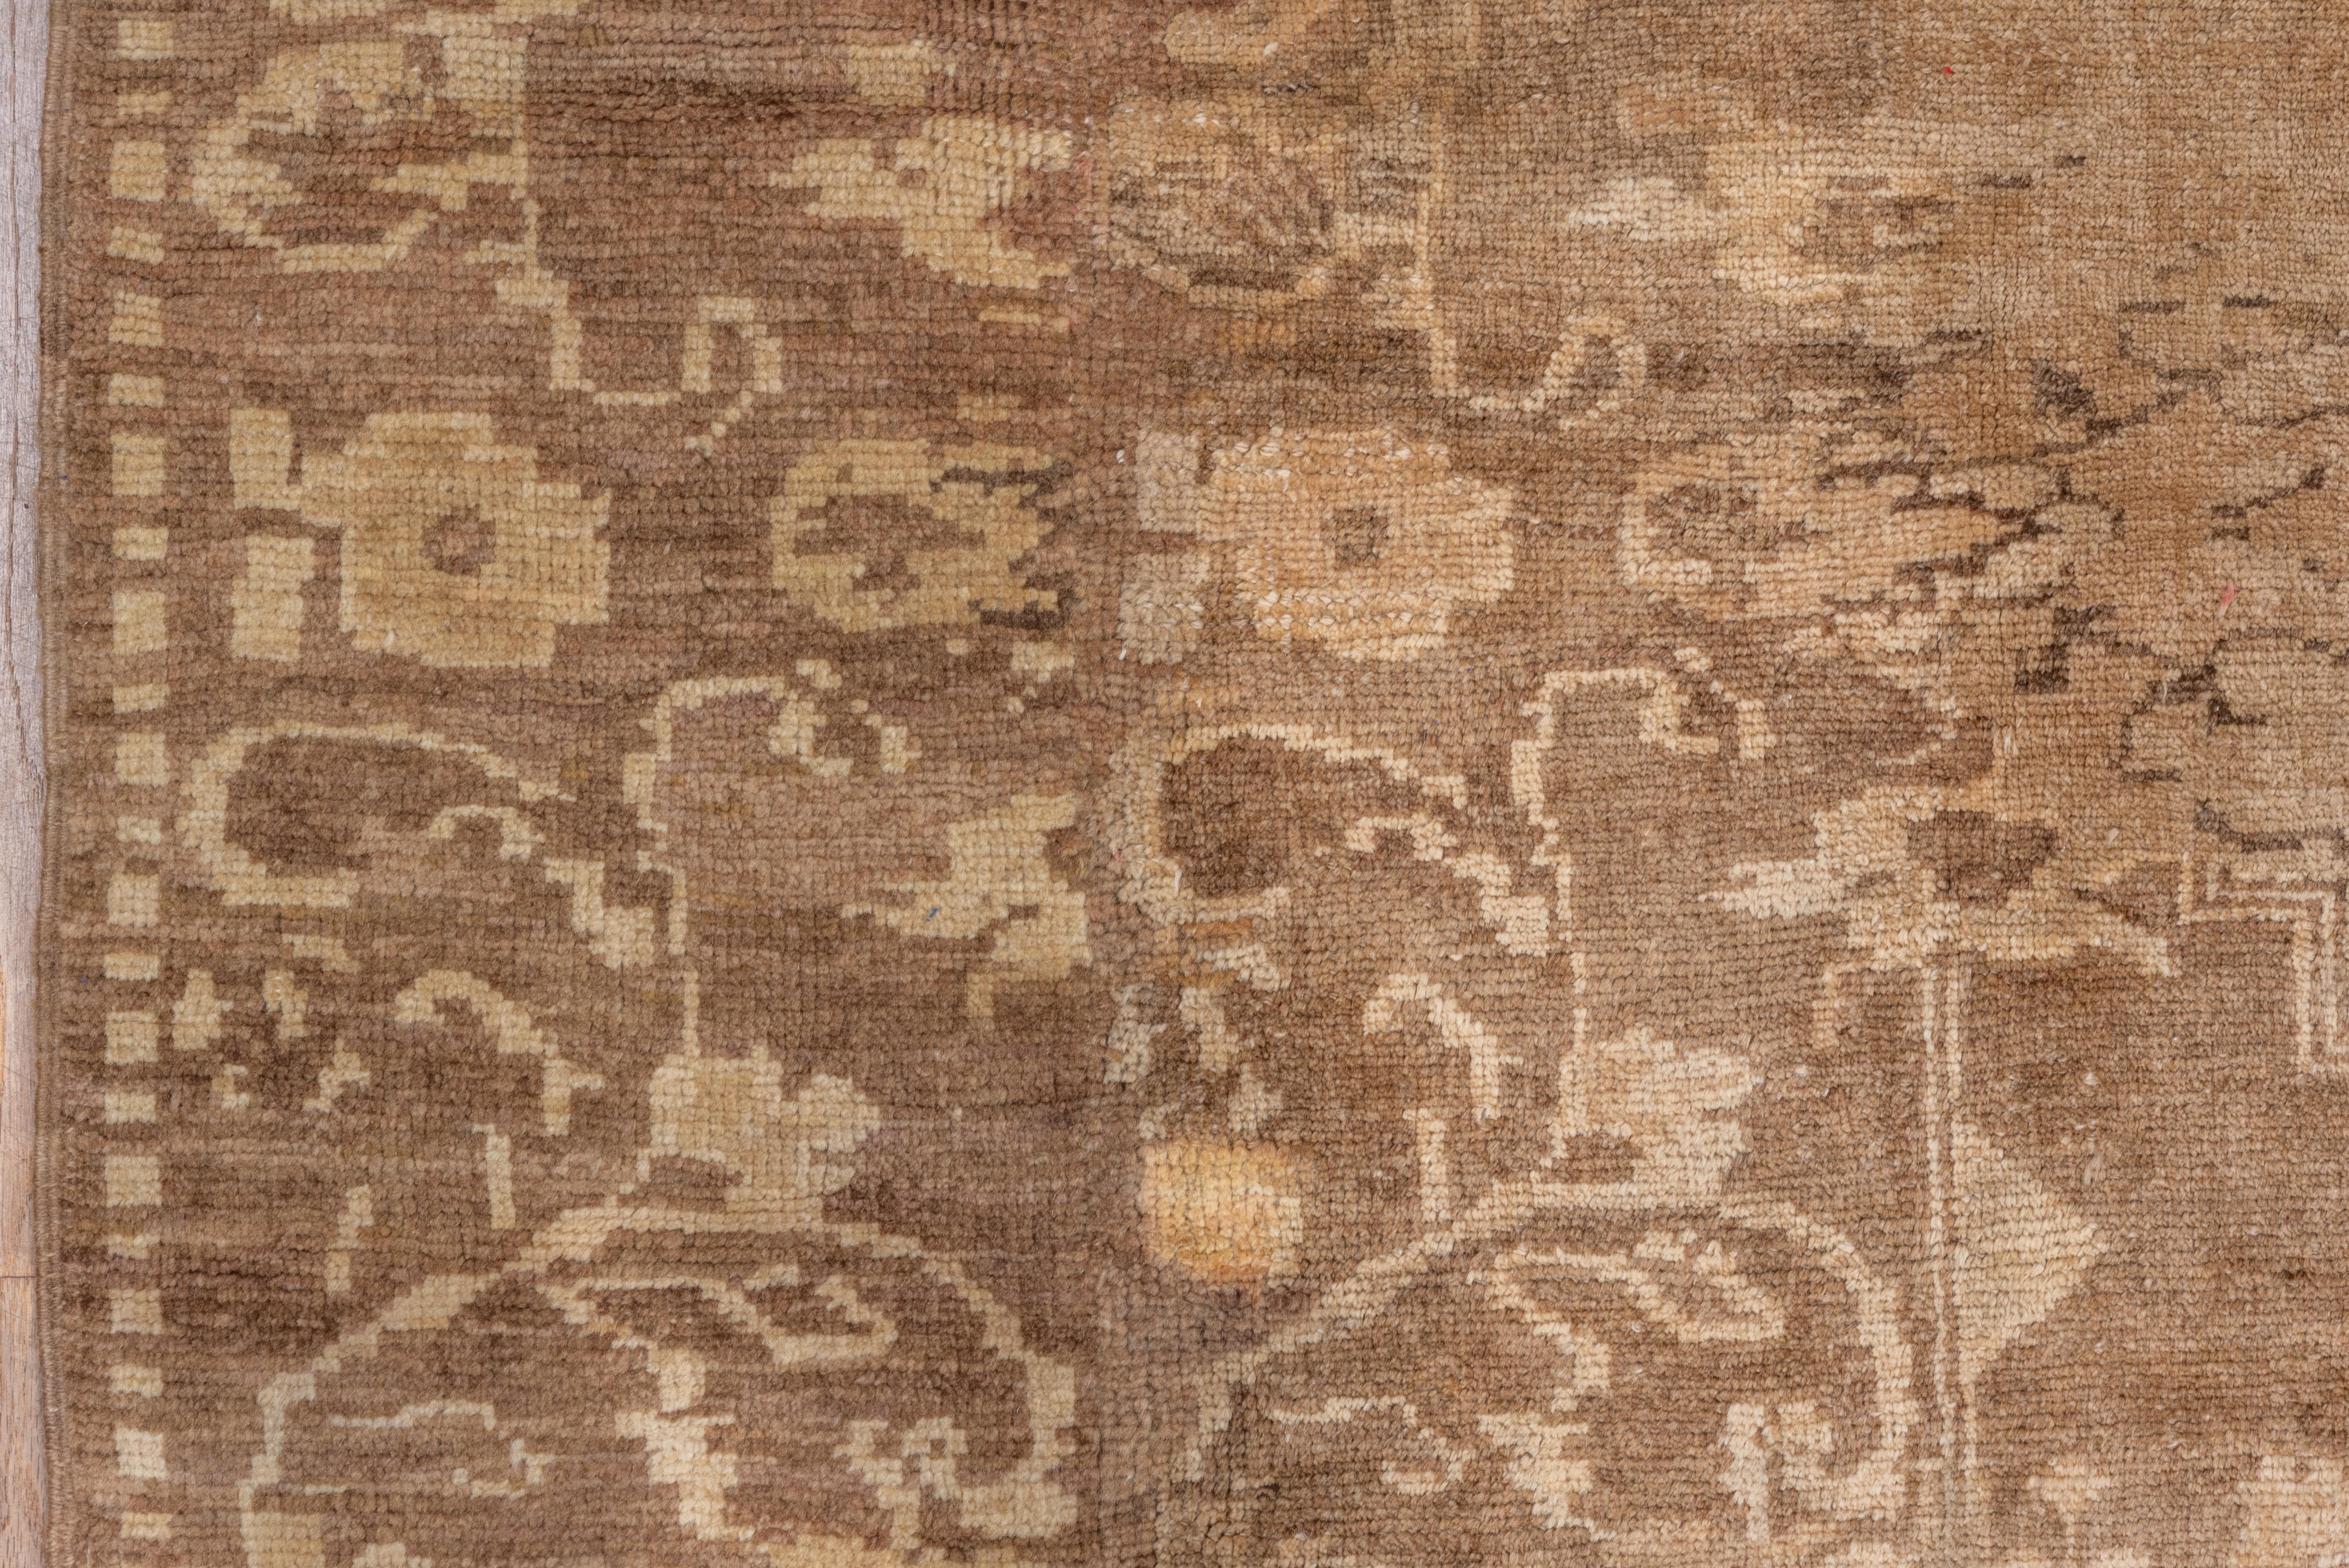 The light brownish field of this West Anatolian town carpet shows a widely stepped and pendanted brown medallion, with similar semi-geometric corners. Doubled main border of floral sprays on brown and gold grounds.